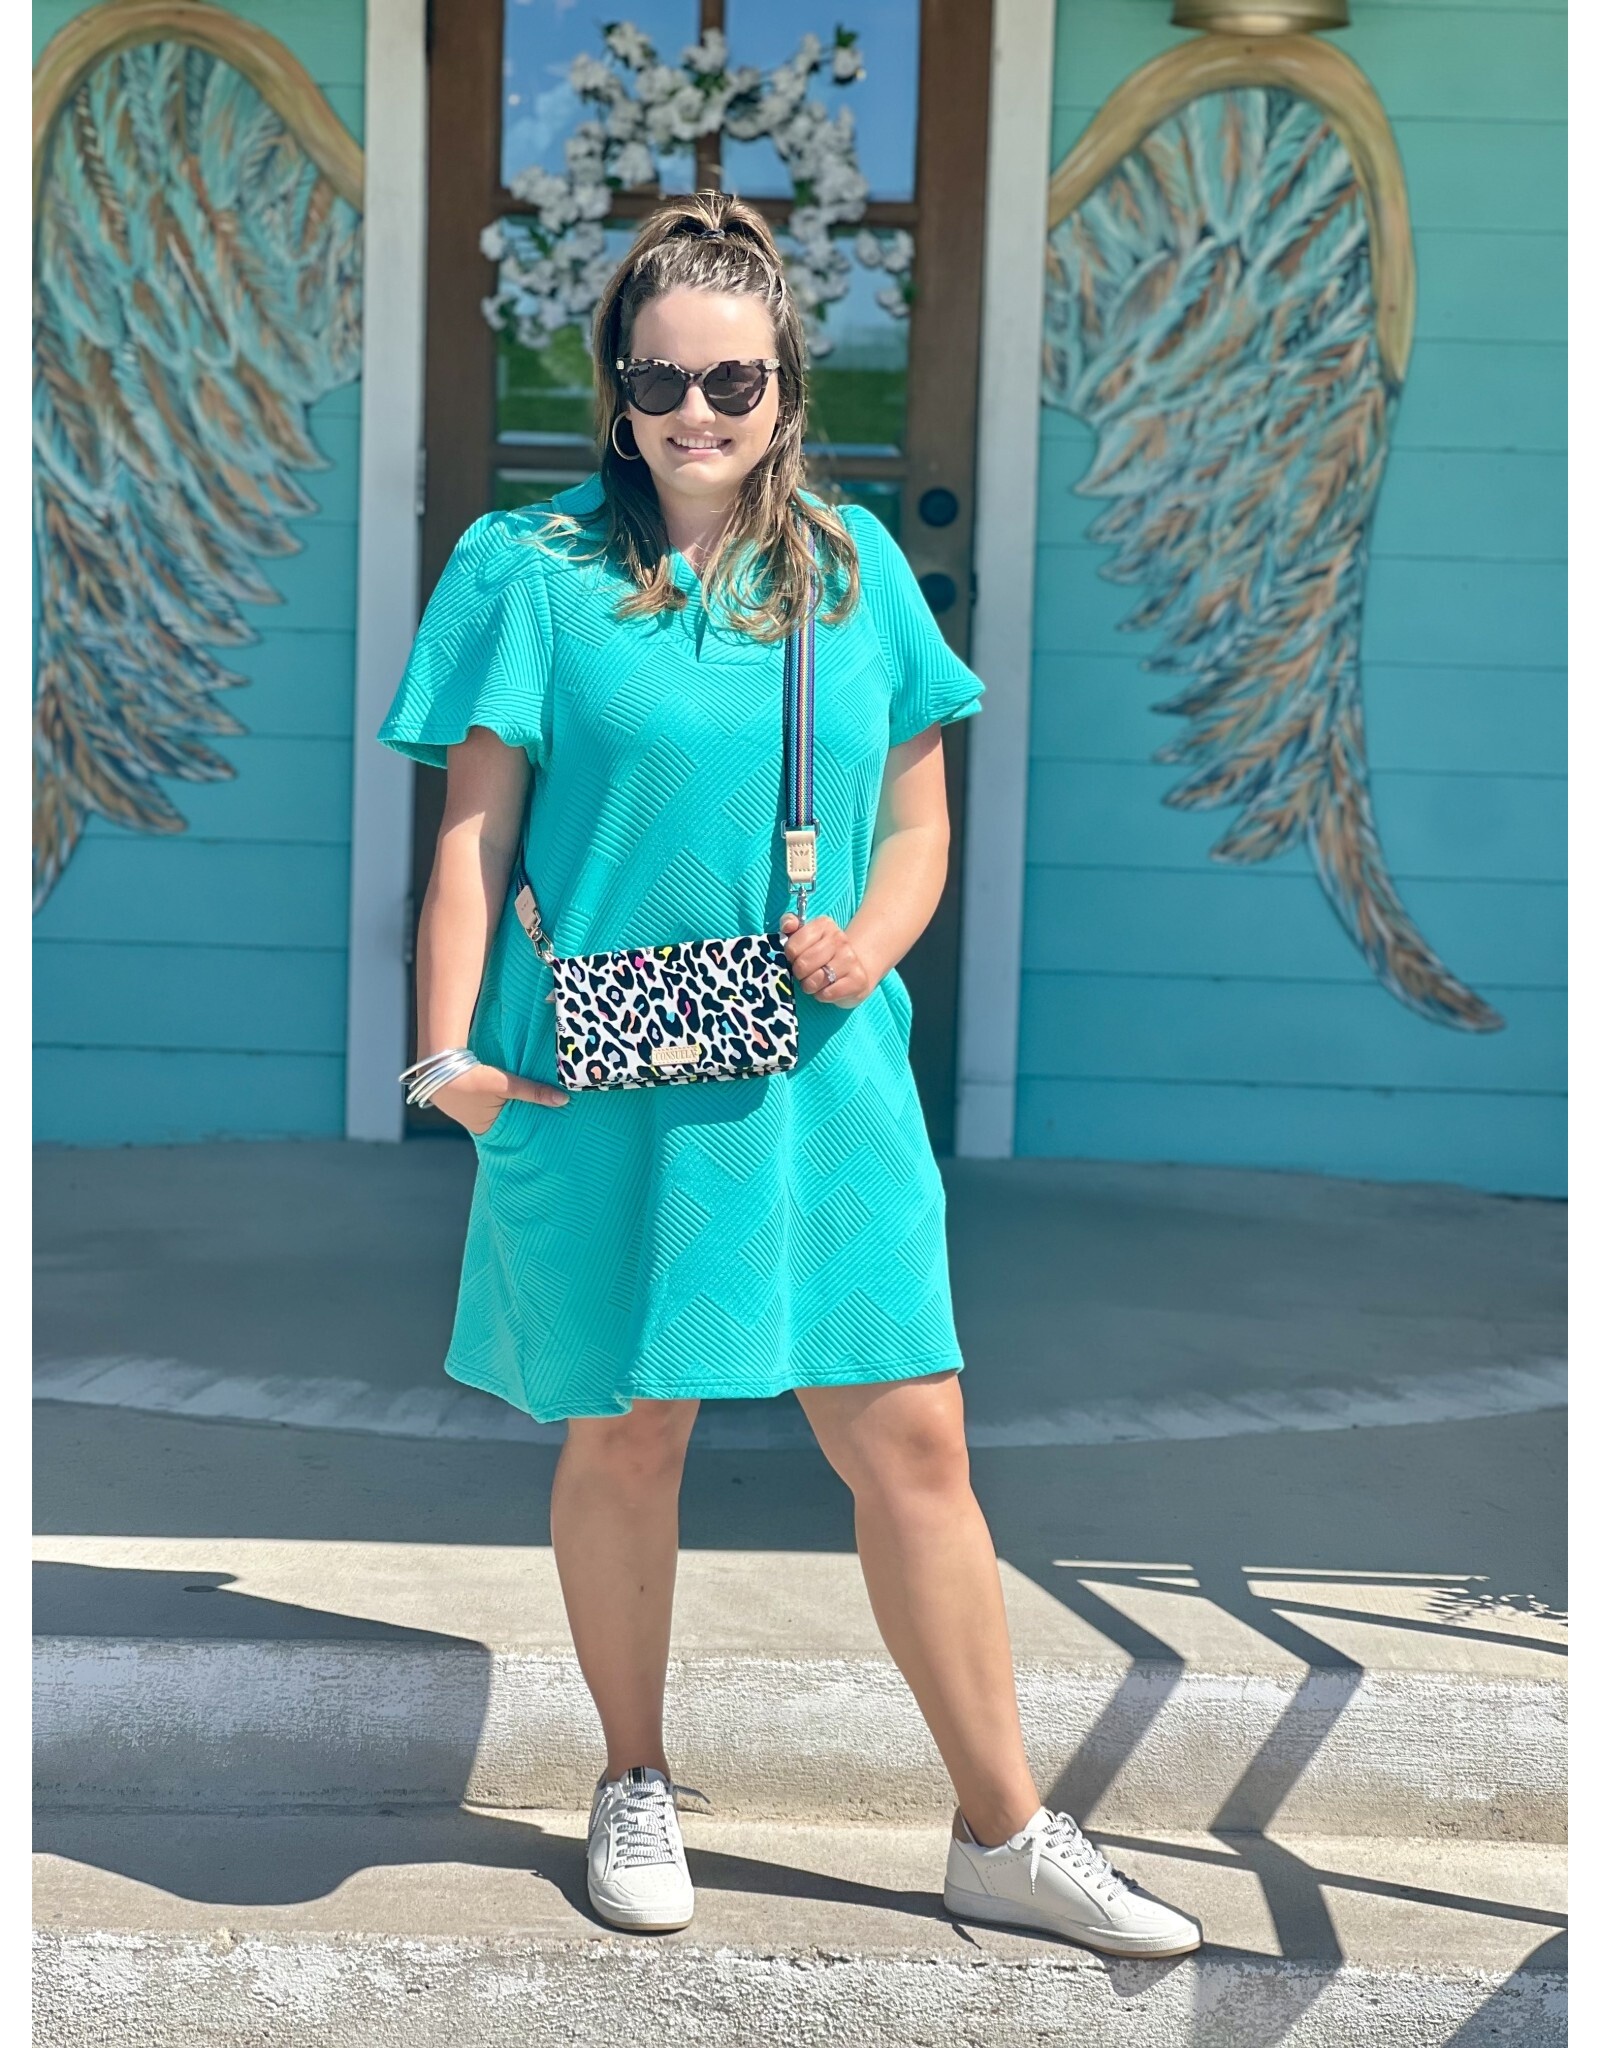 Turquoise Collared Textured Dress